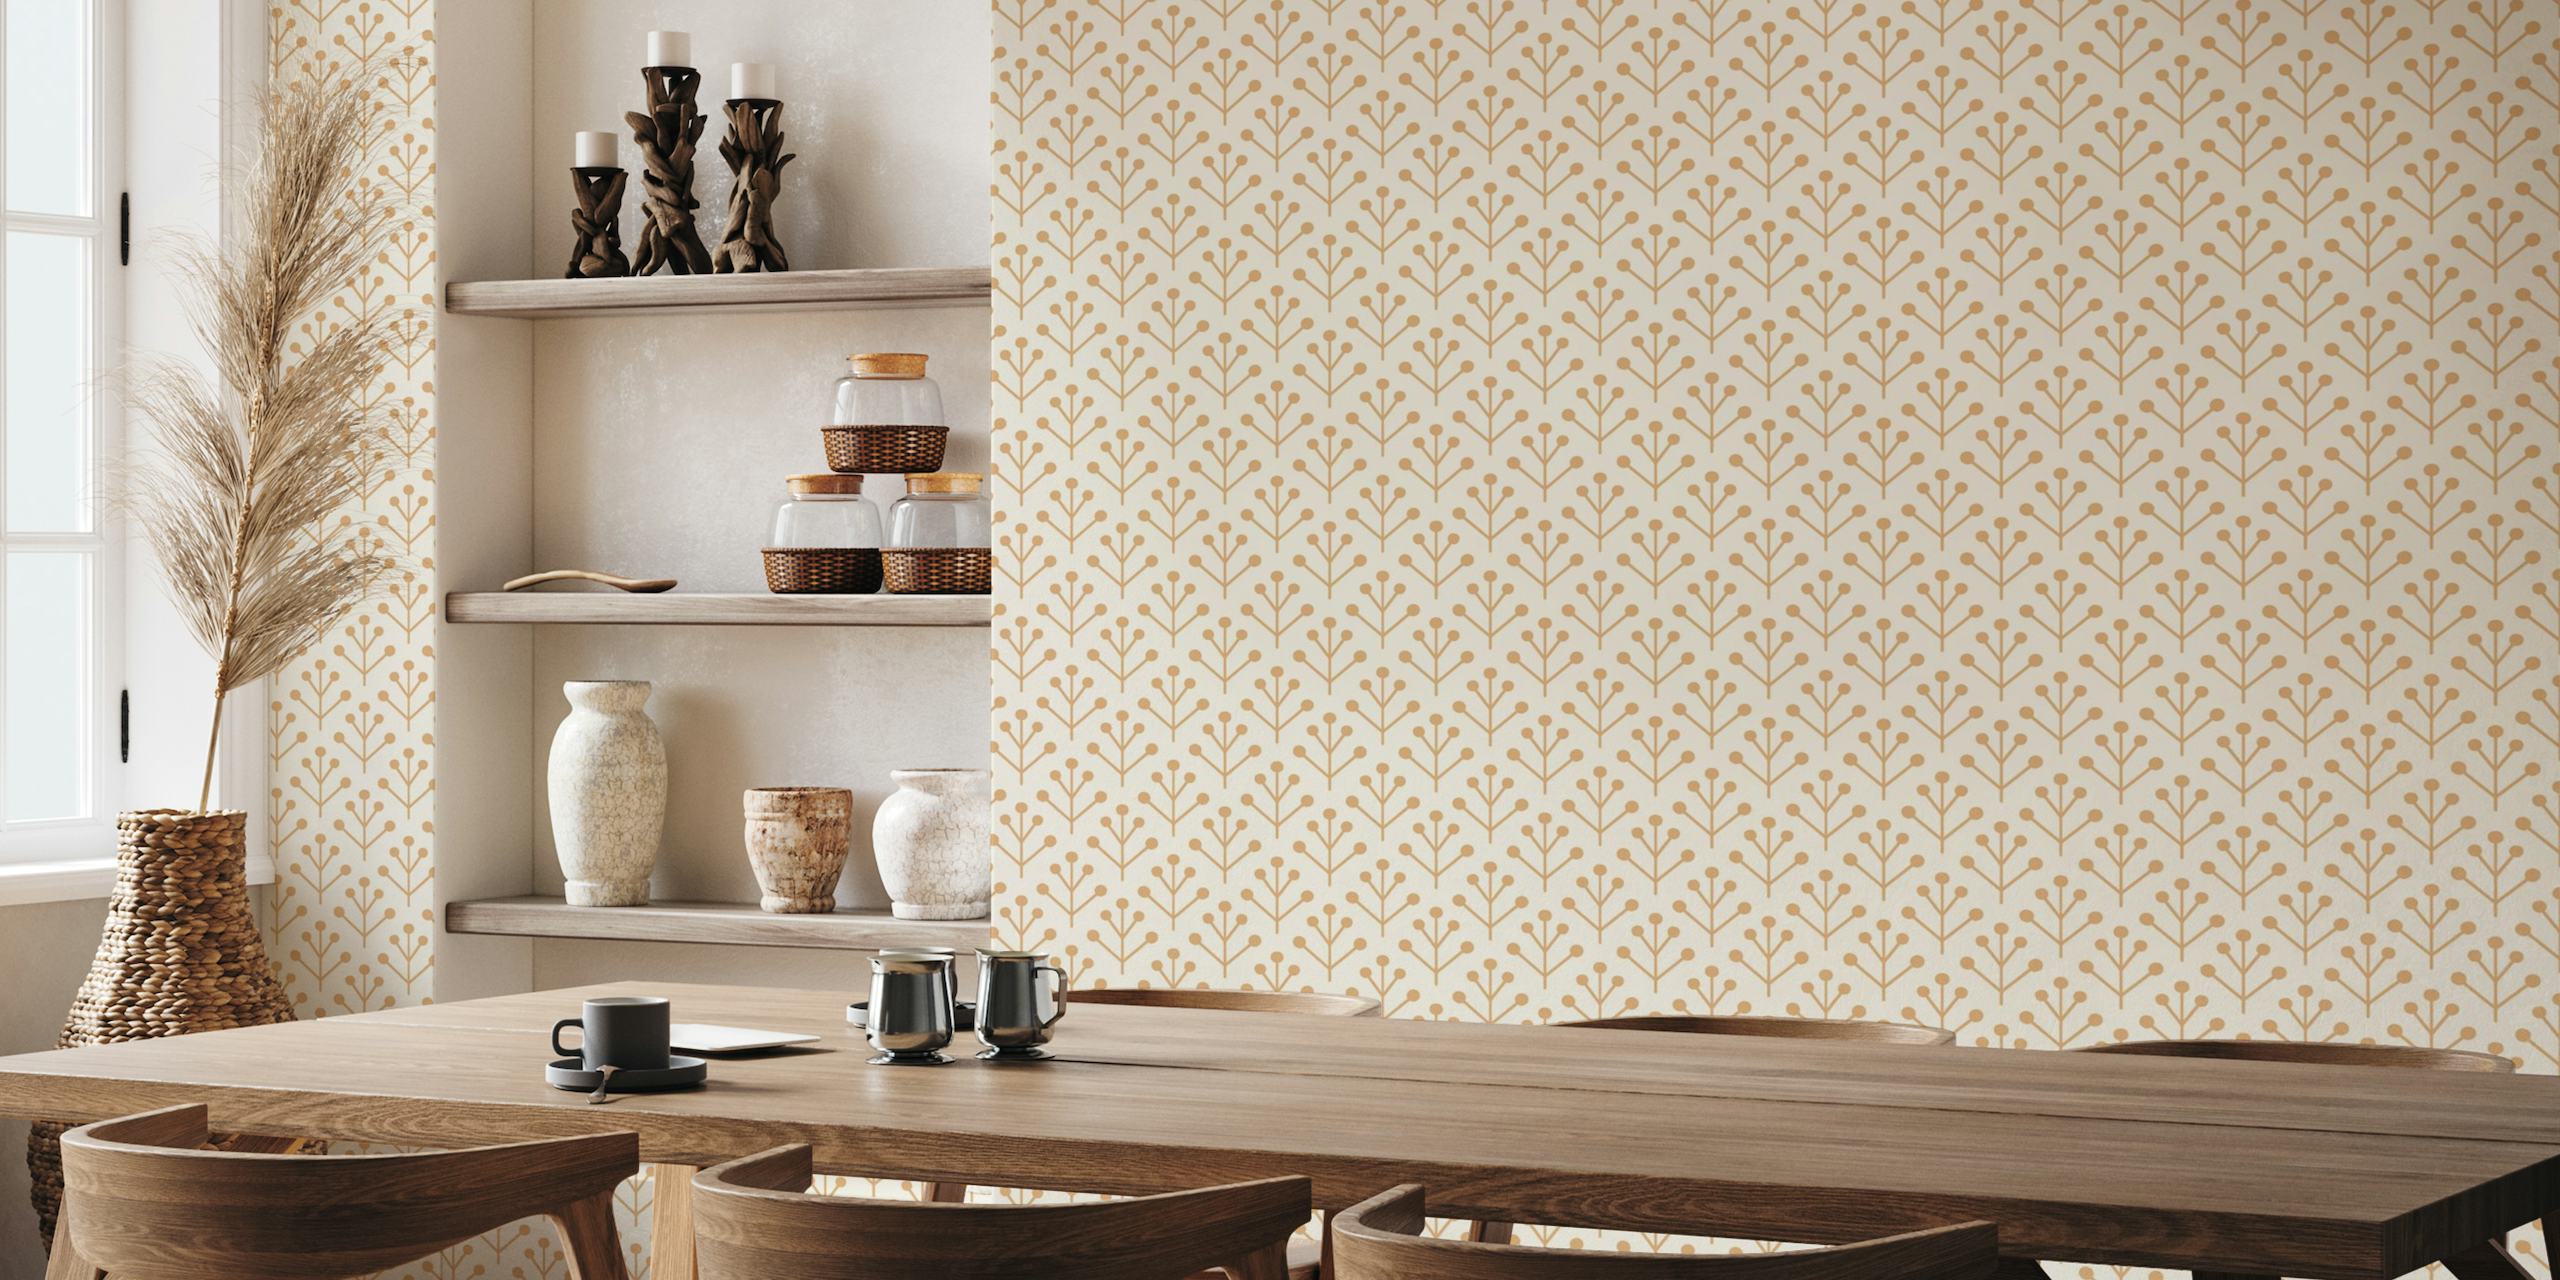 Scandinavian-style twig pattern wall mural with yellow berries on cream background